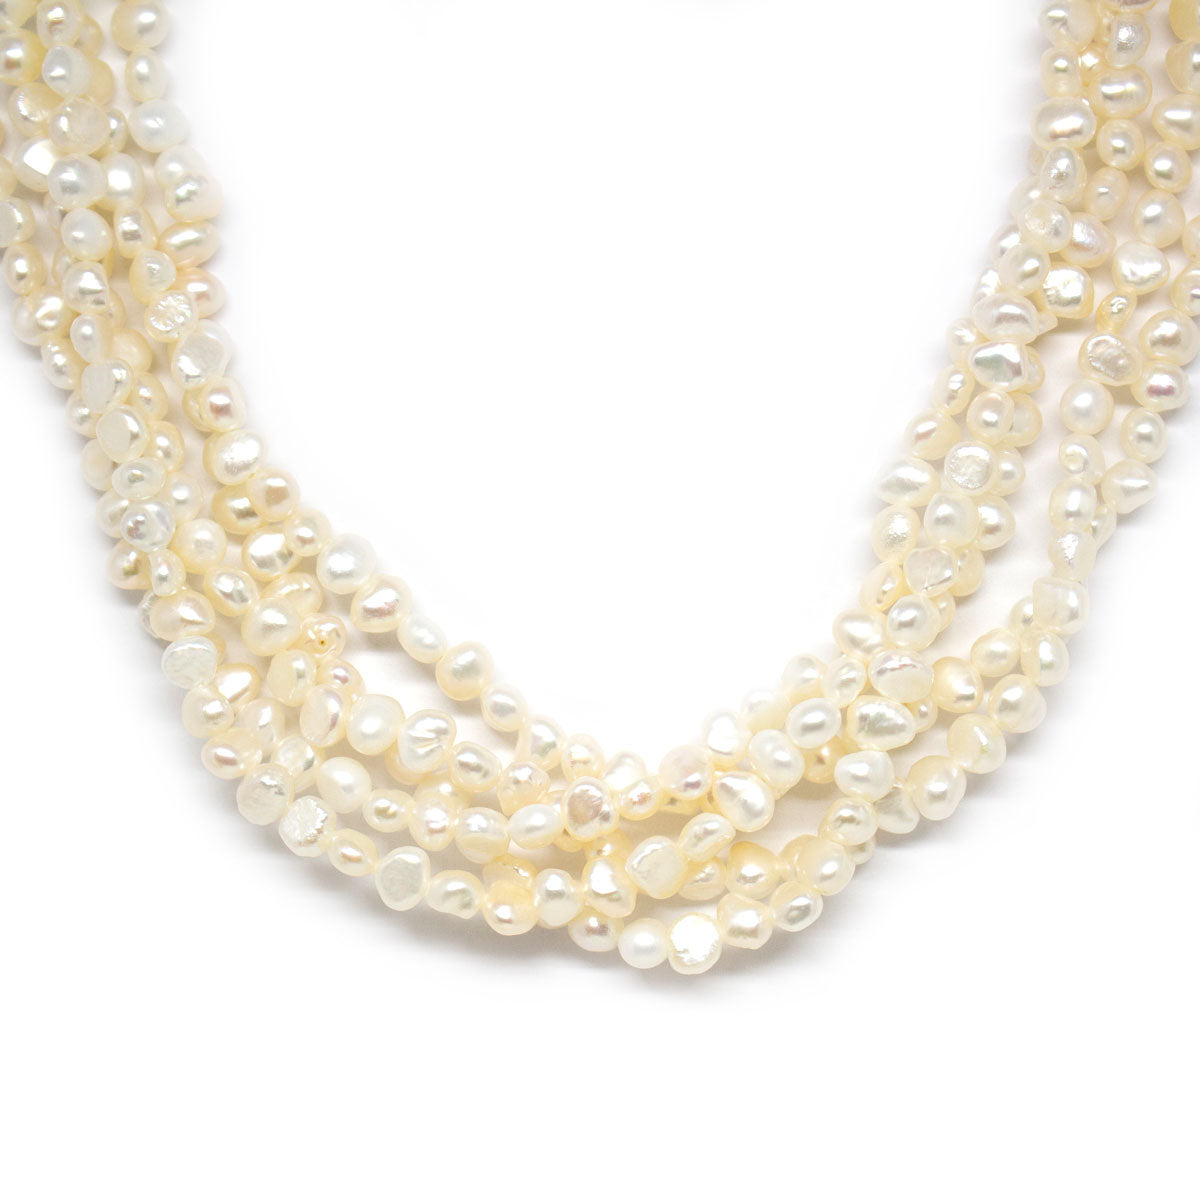 Elegant Baroque Pearl Necklace - Timeless Pearl